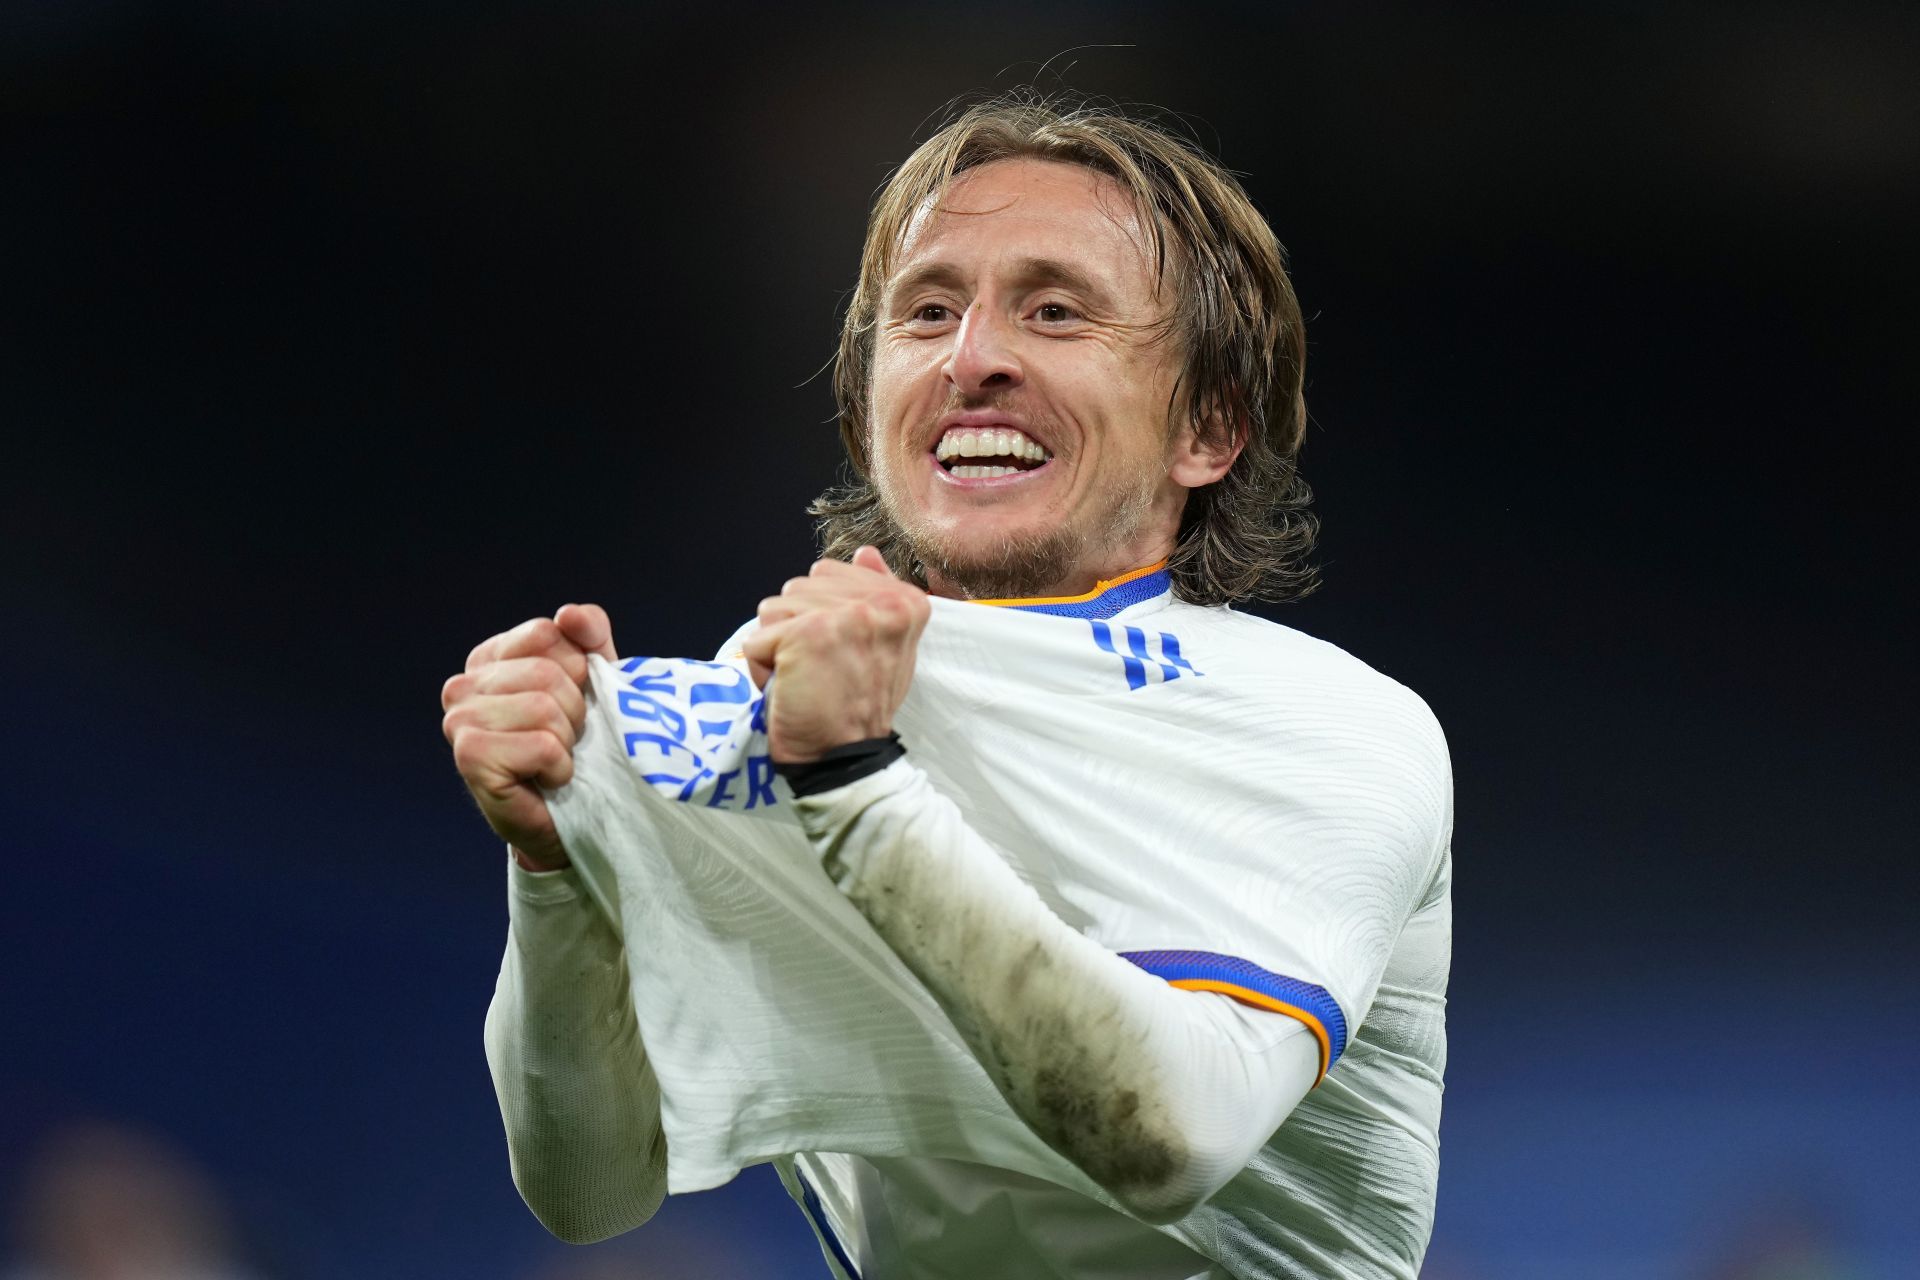 Luka Modric will play a key role against Chelsea in the Champions League